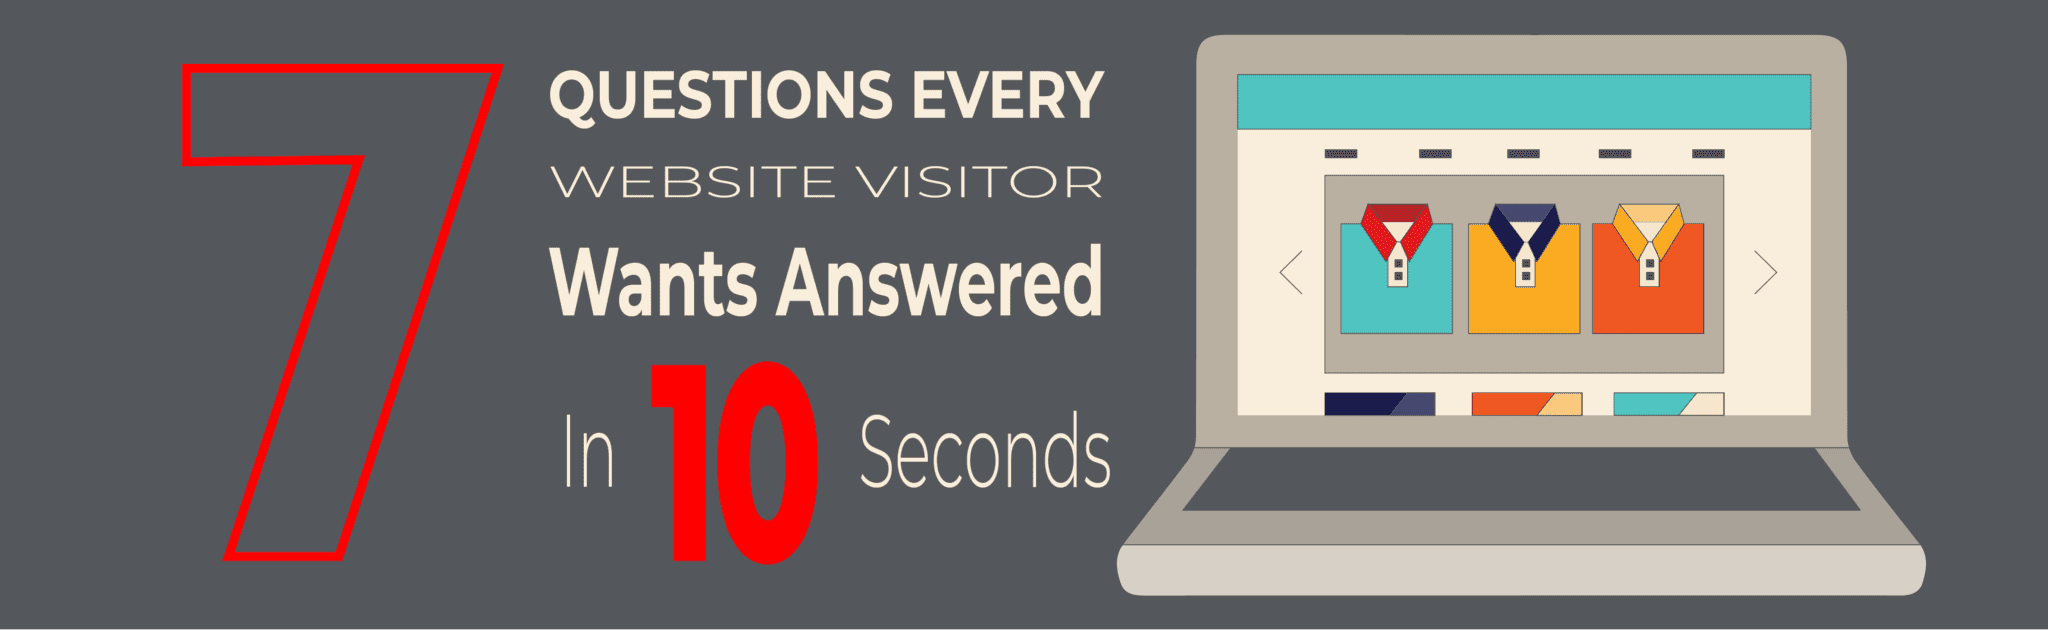 7 questions every website visitor wants answered in 10 seconds graphic by springboard website design